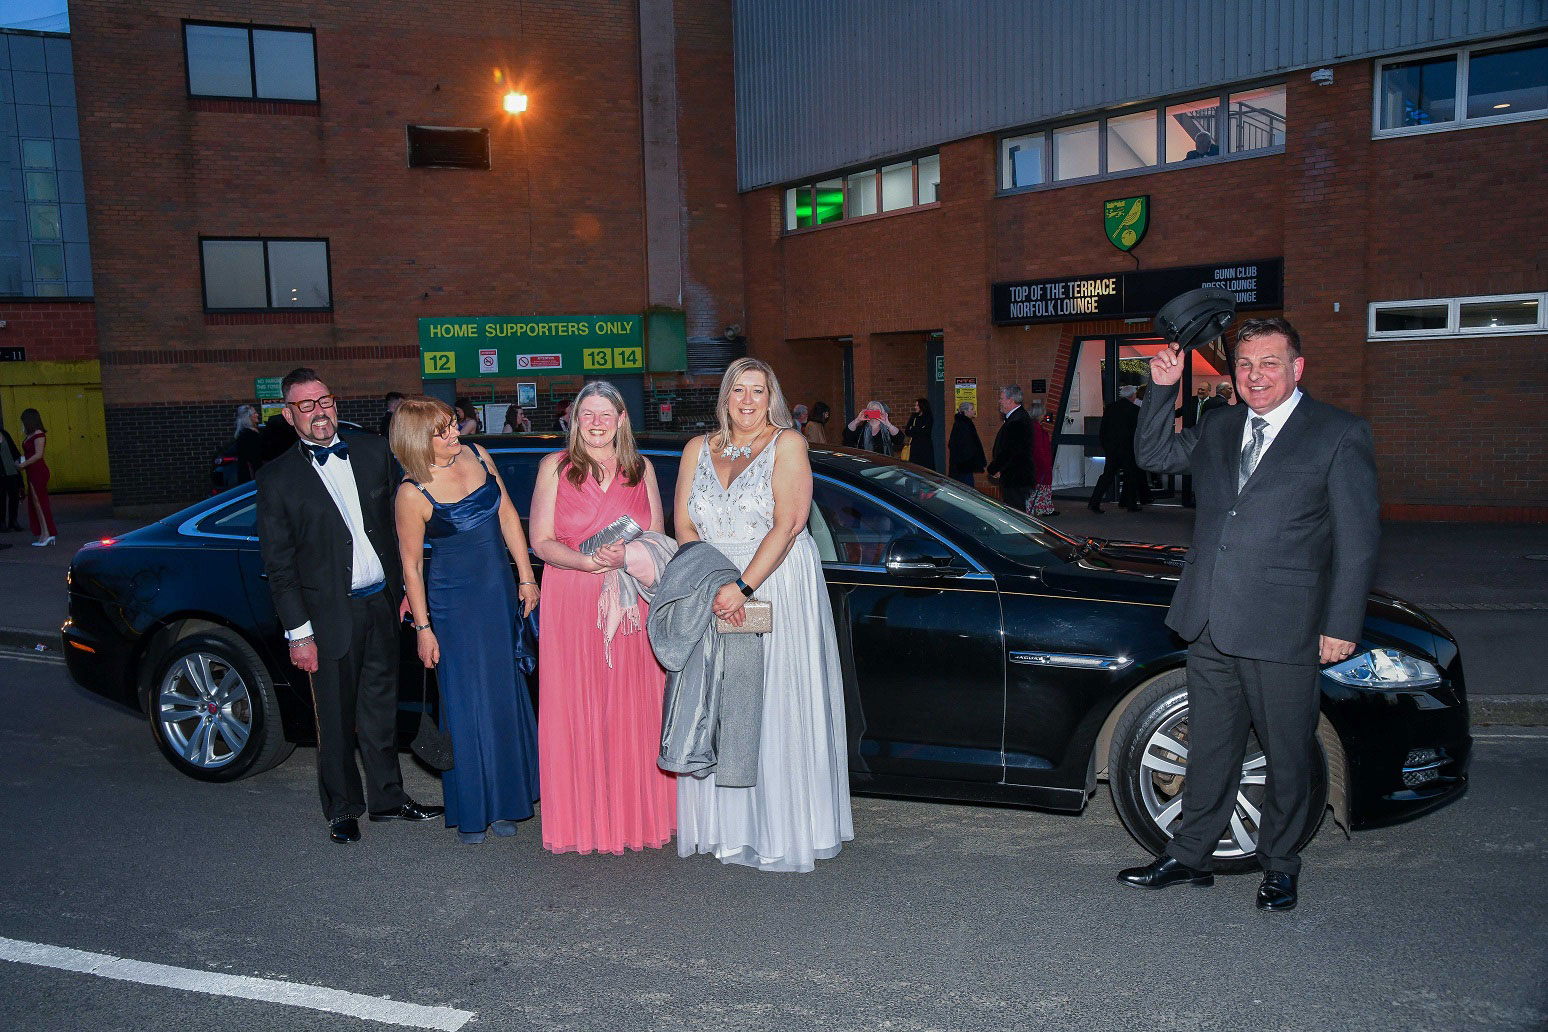 Guests arriving in a limo at the Business Awards